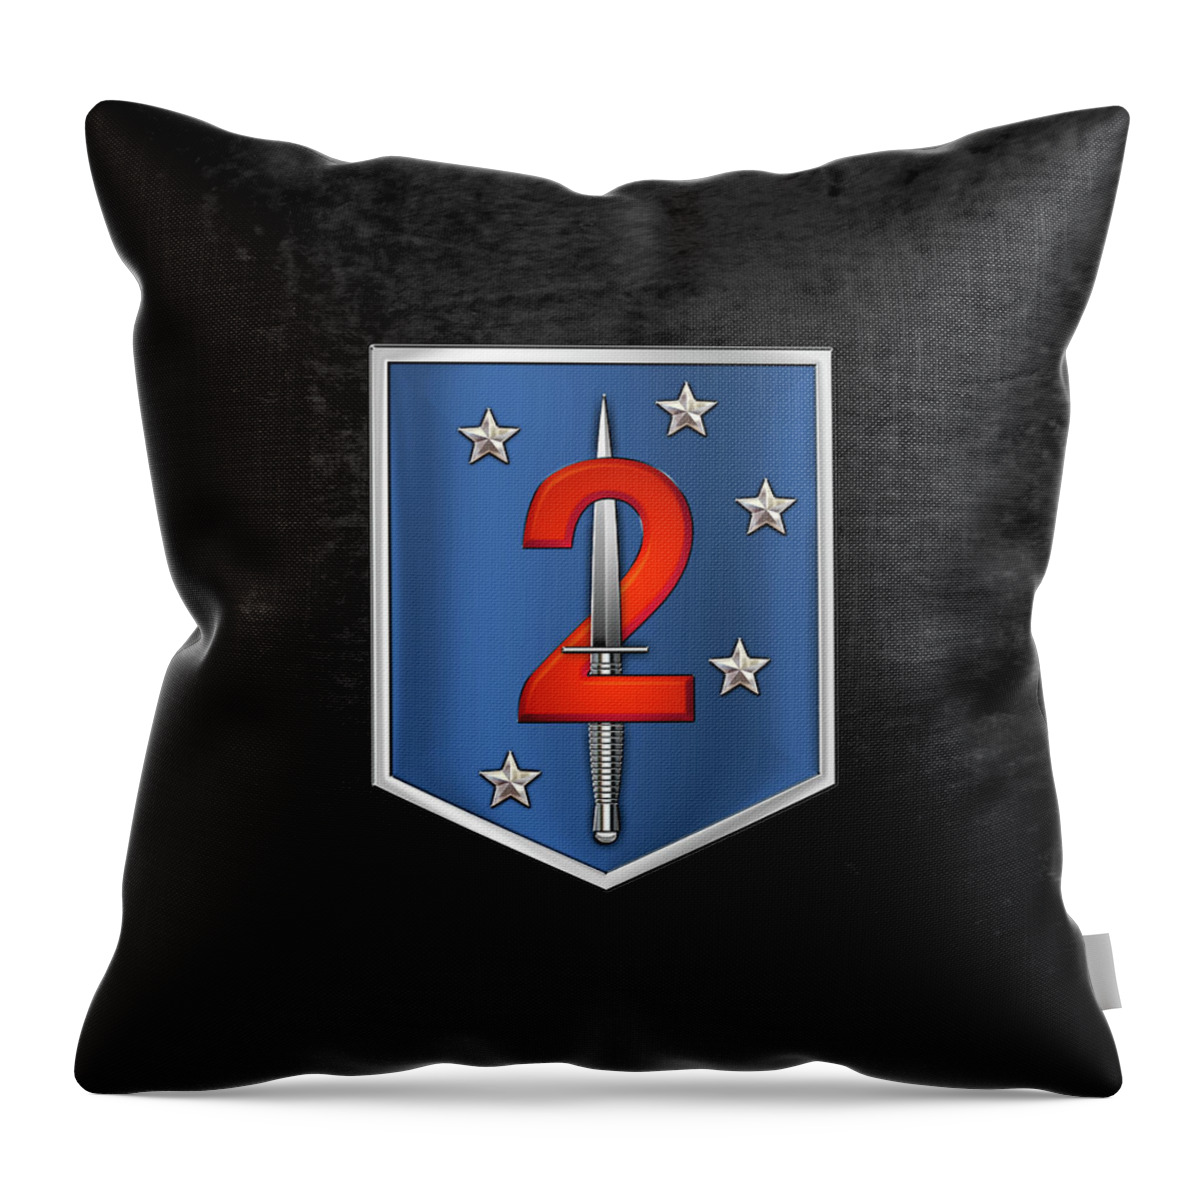 ‘military Insignia & Heraldry’ Collection By Serge Averbukh Throw Pillow featuring the digital art 2nd Marine Raider Battalion - 2nd Marine Special Operations Battalion M S O B Patch over Black Velv by Serge Averbukh